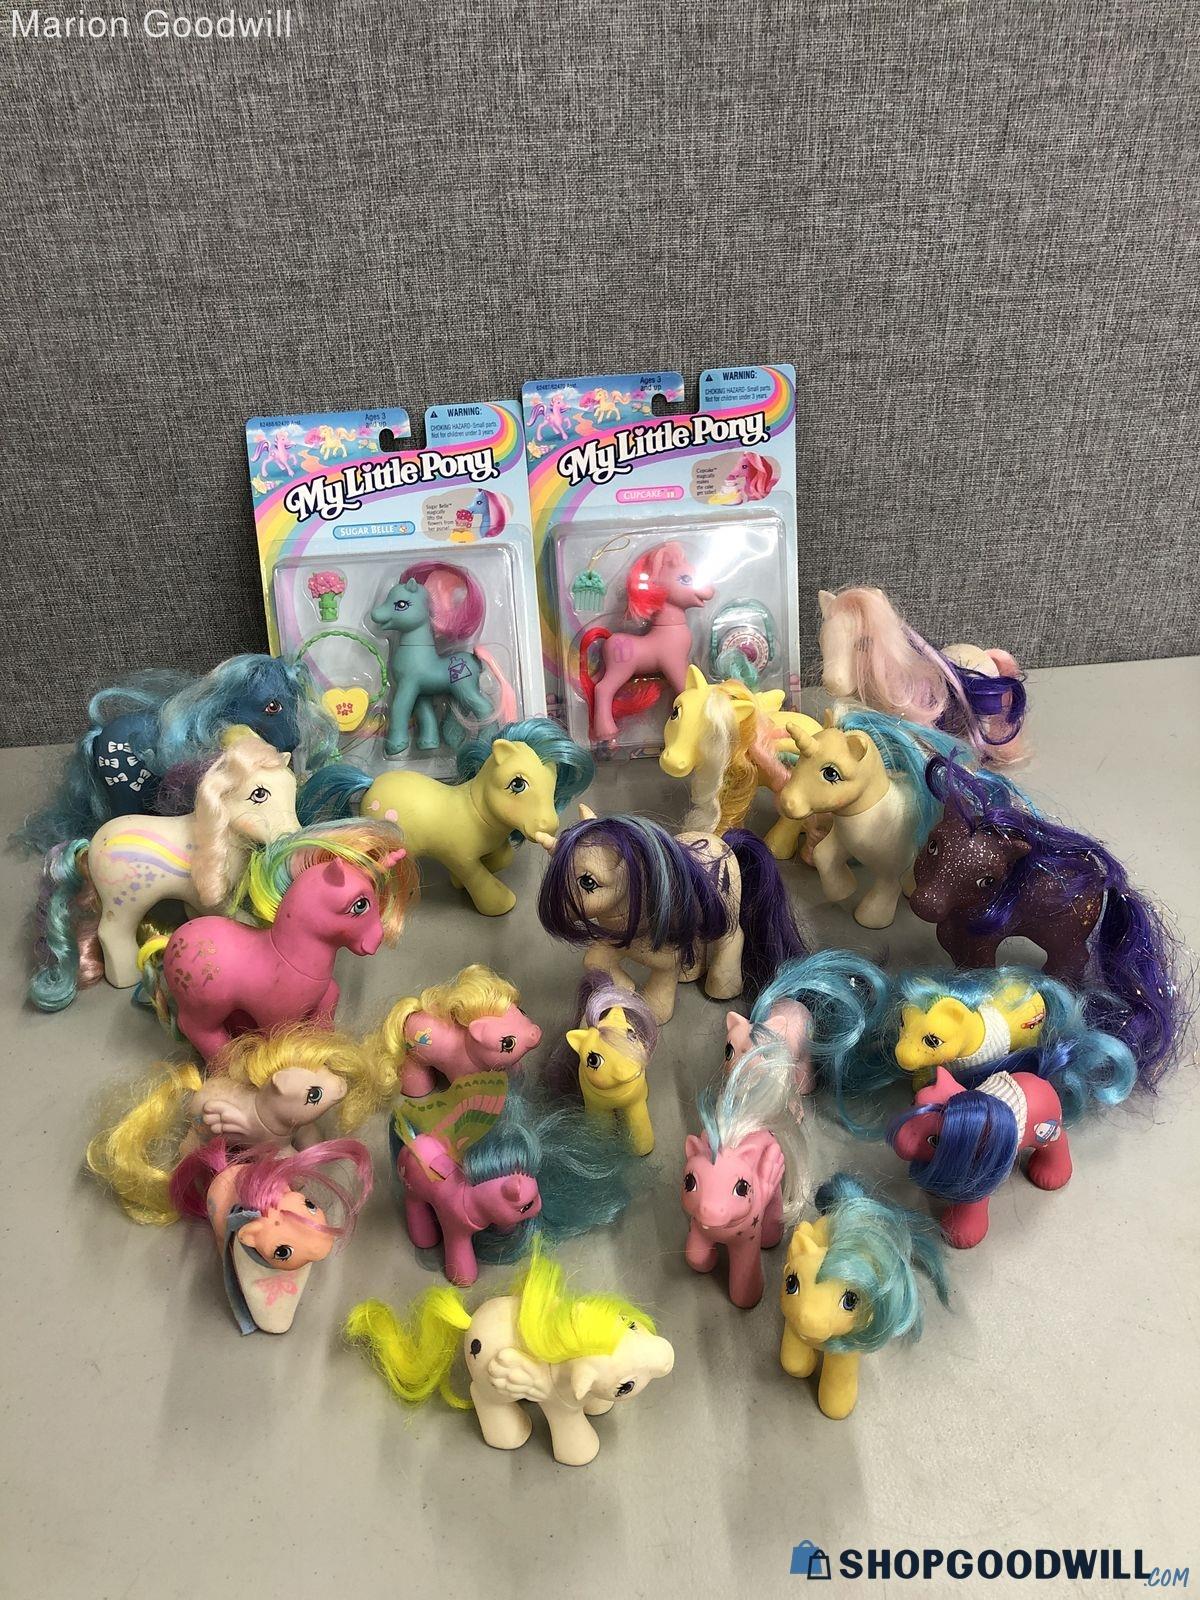 Vintage Hasbro My Little Pony Ponies - 2 NEW in Package - shopgoodwill.com